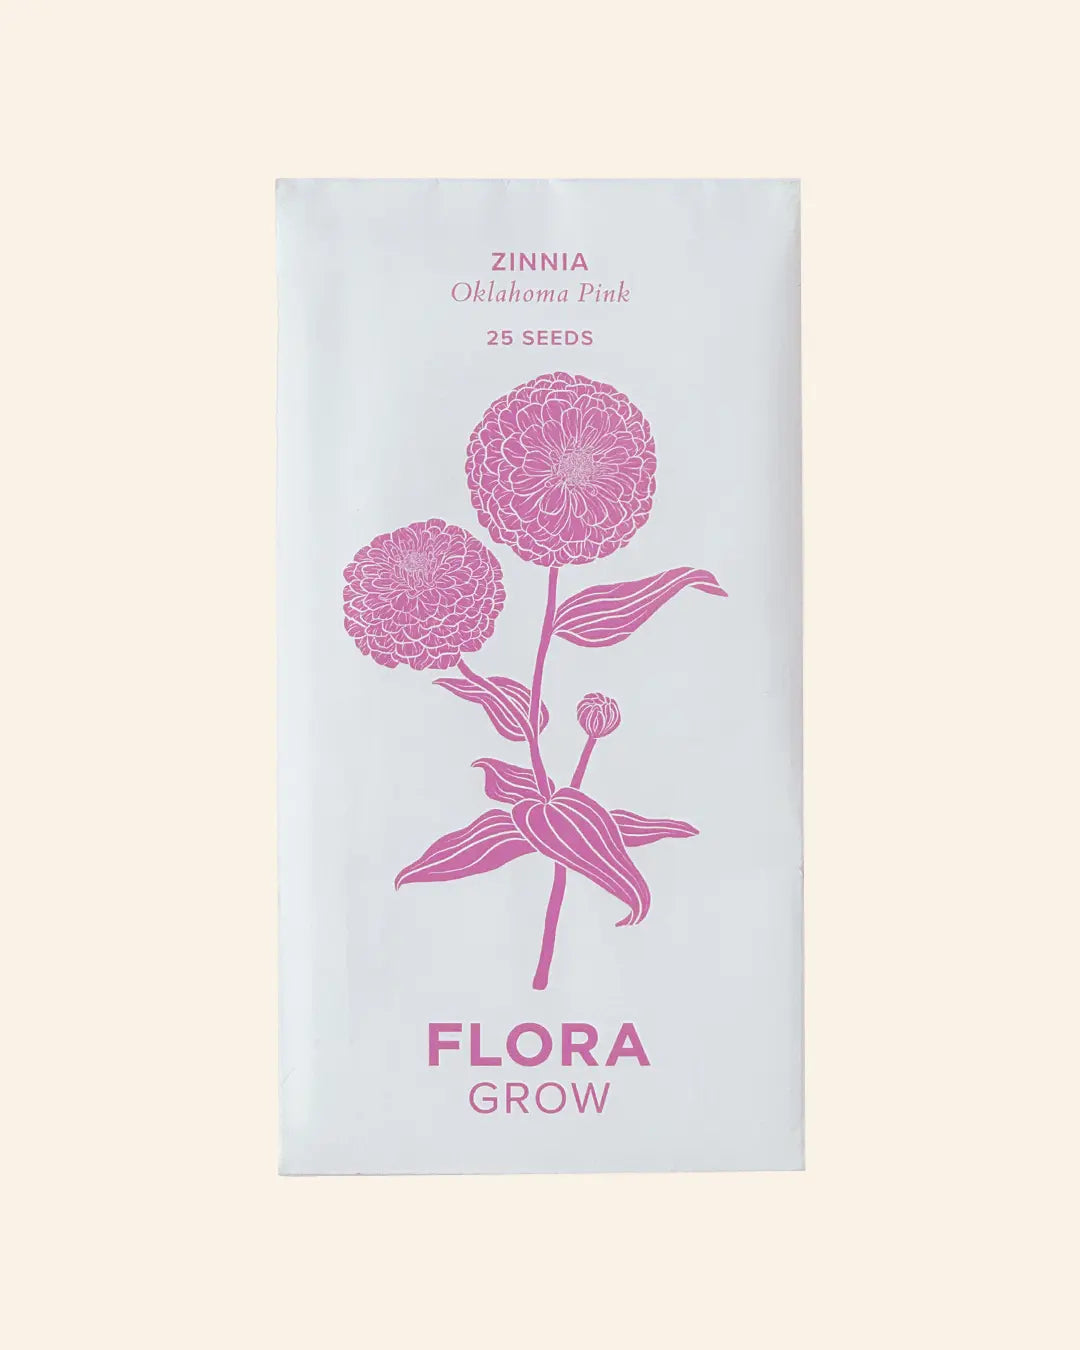 Zinnia Oklahoma Pink Seed Pack by Flora Grow